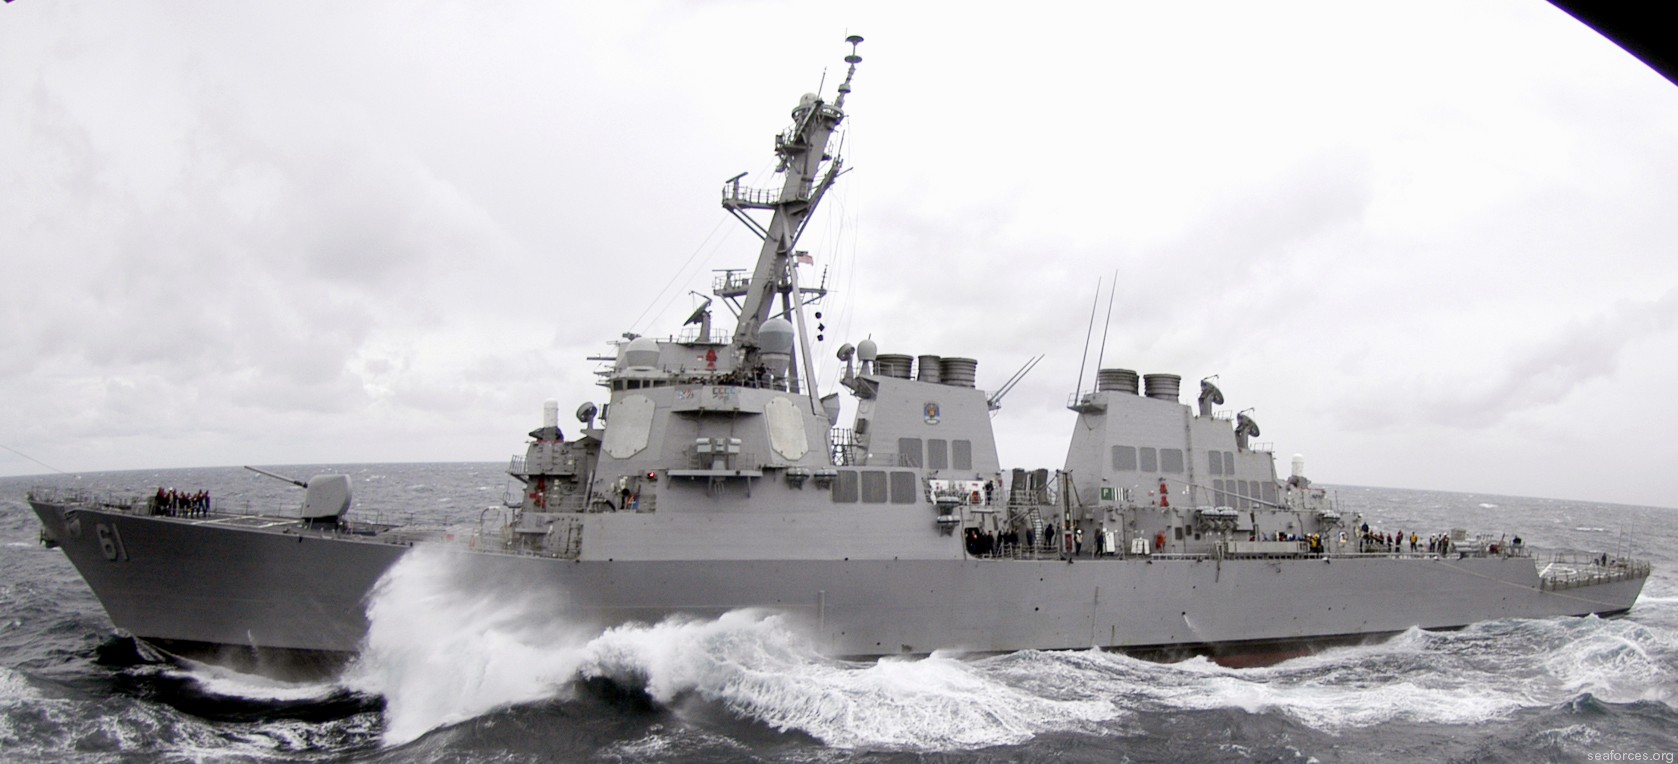 ddg-61 uss ramage guided missile destroyer us navy 64